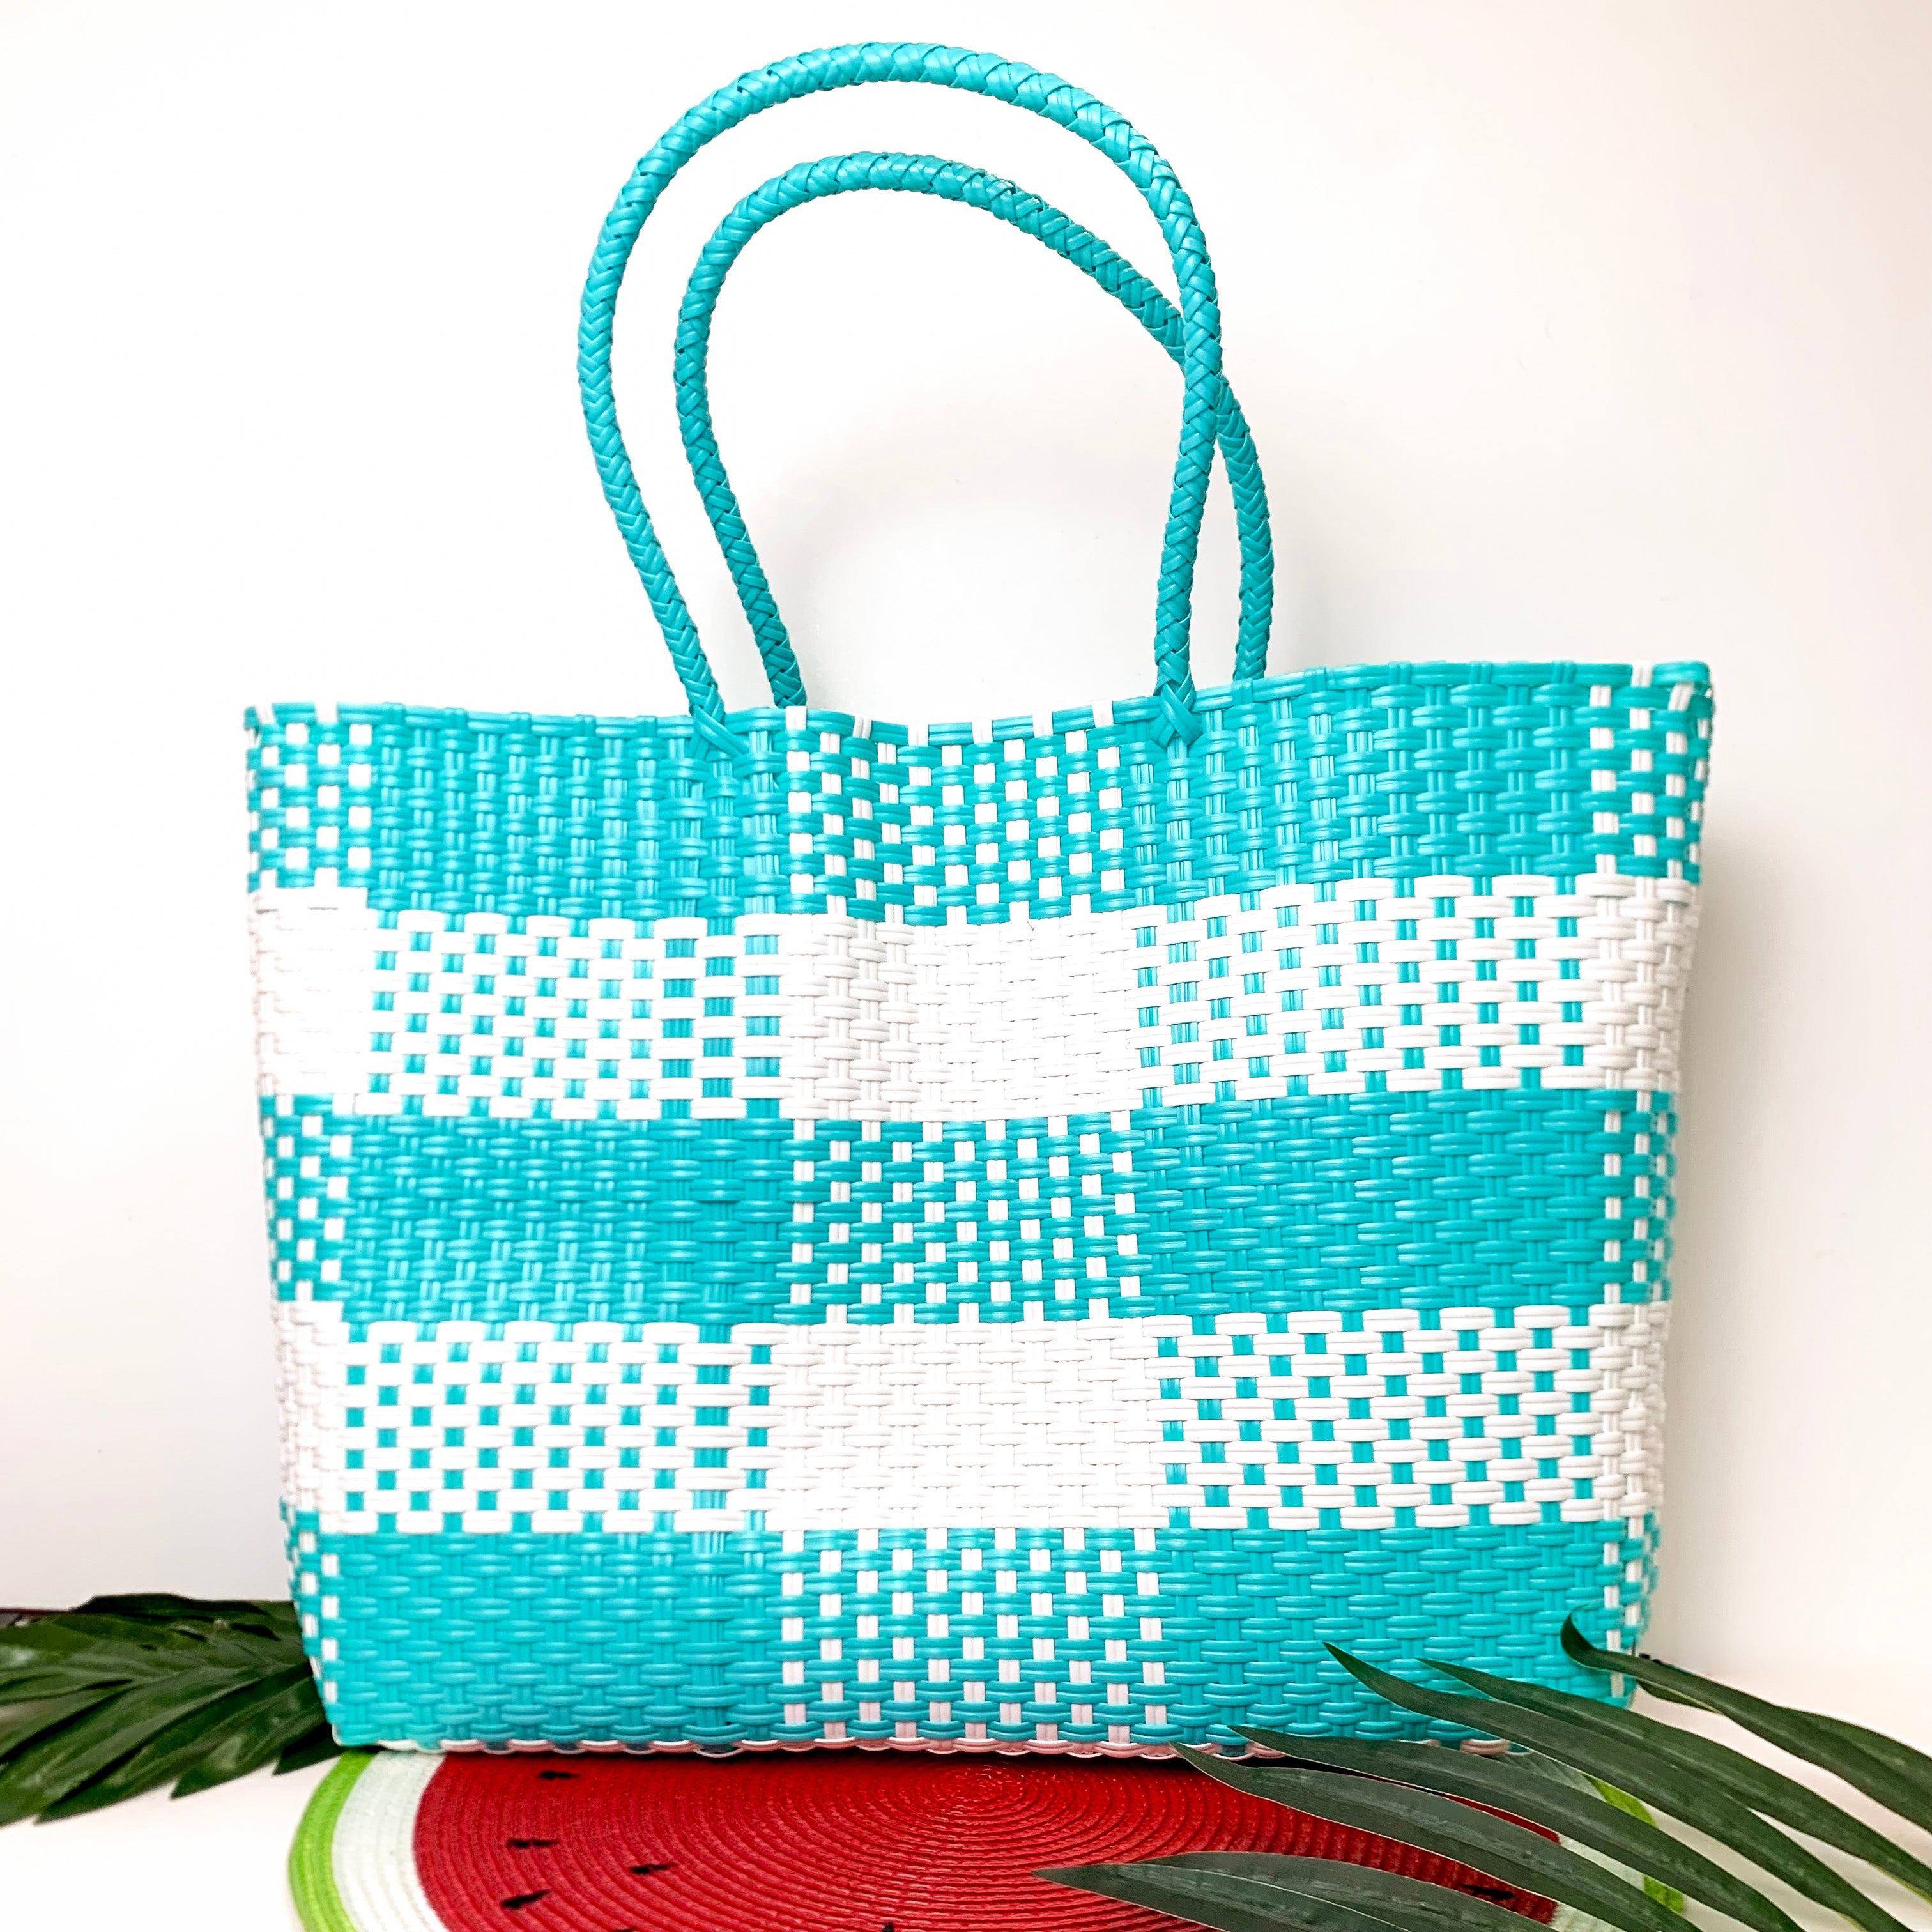 Garden Party Gingham Tote Bag in Turquoise Blue and White